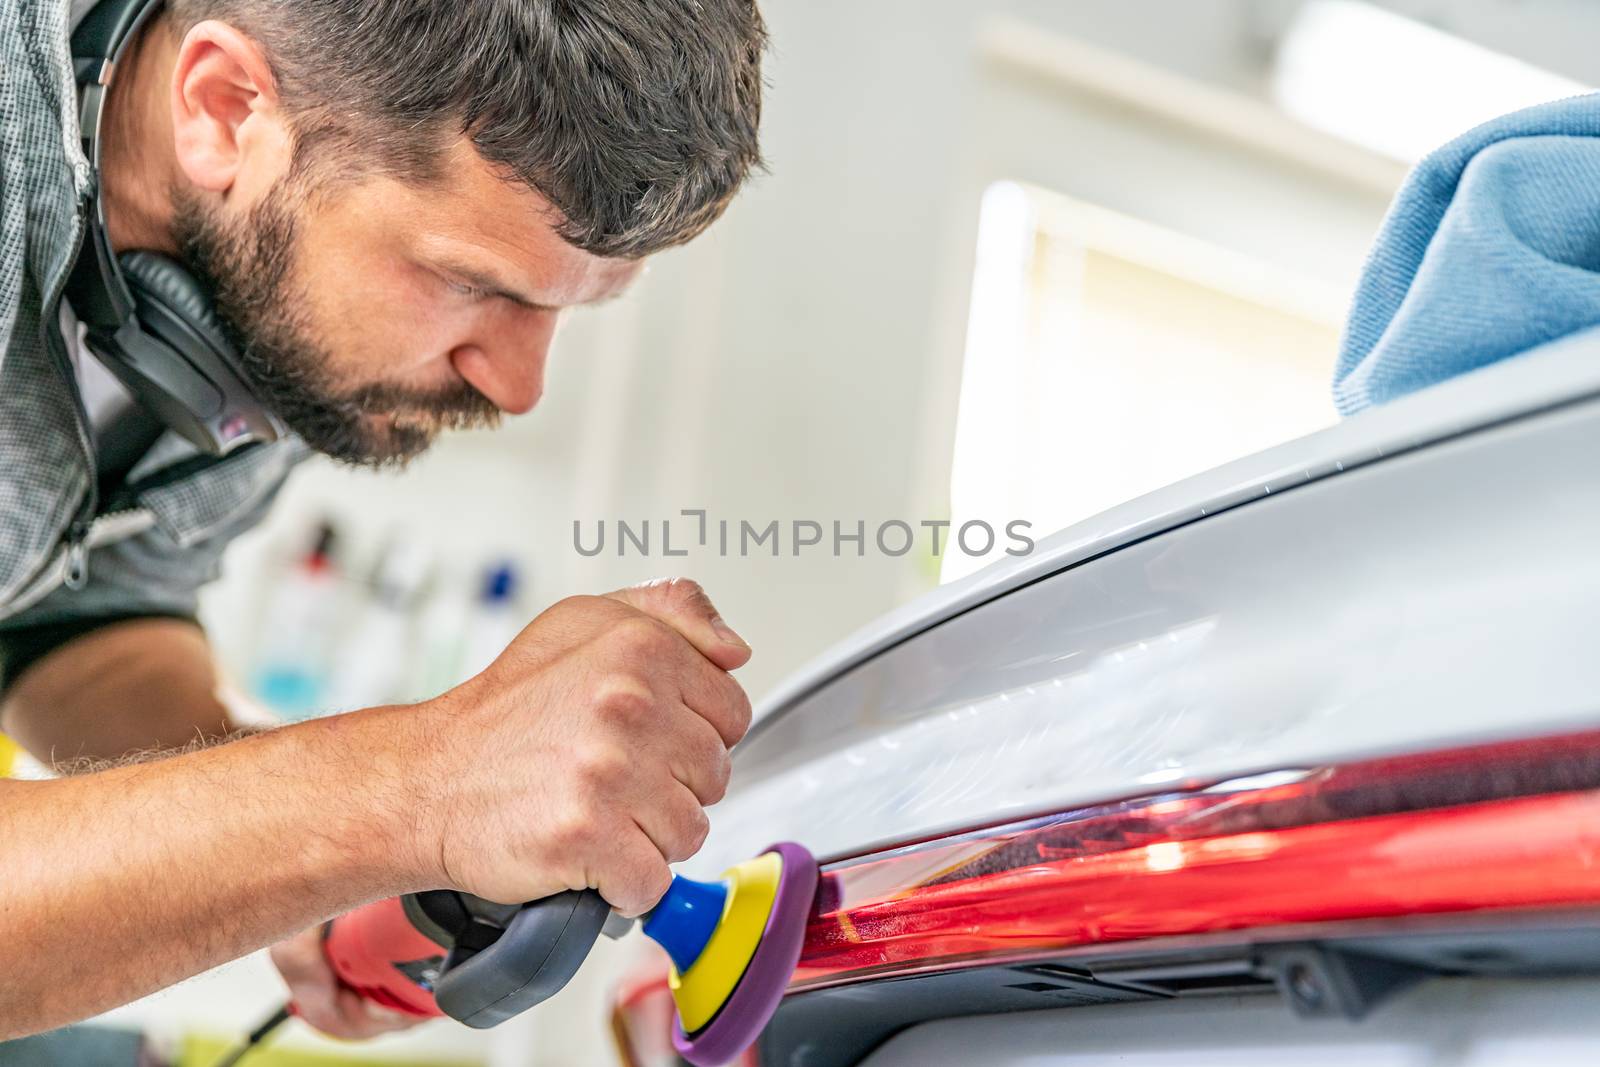 shine restoration and repair of scratches on car taillights with the help of polishing by Edophoto